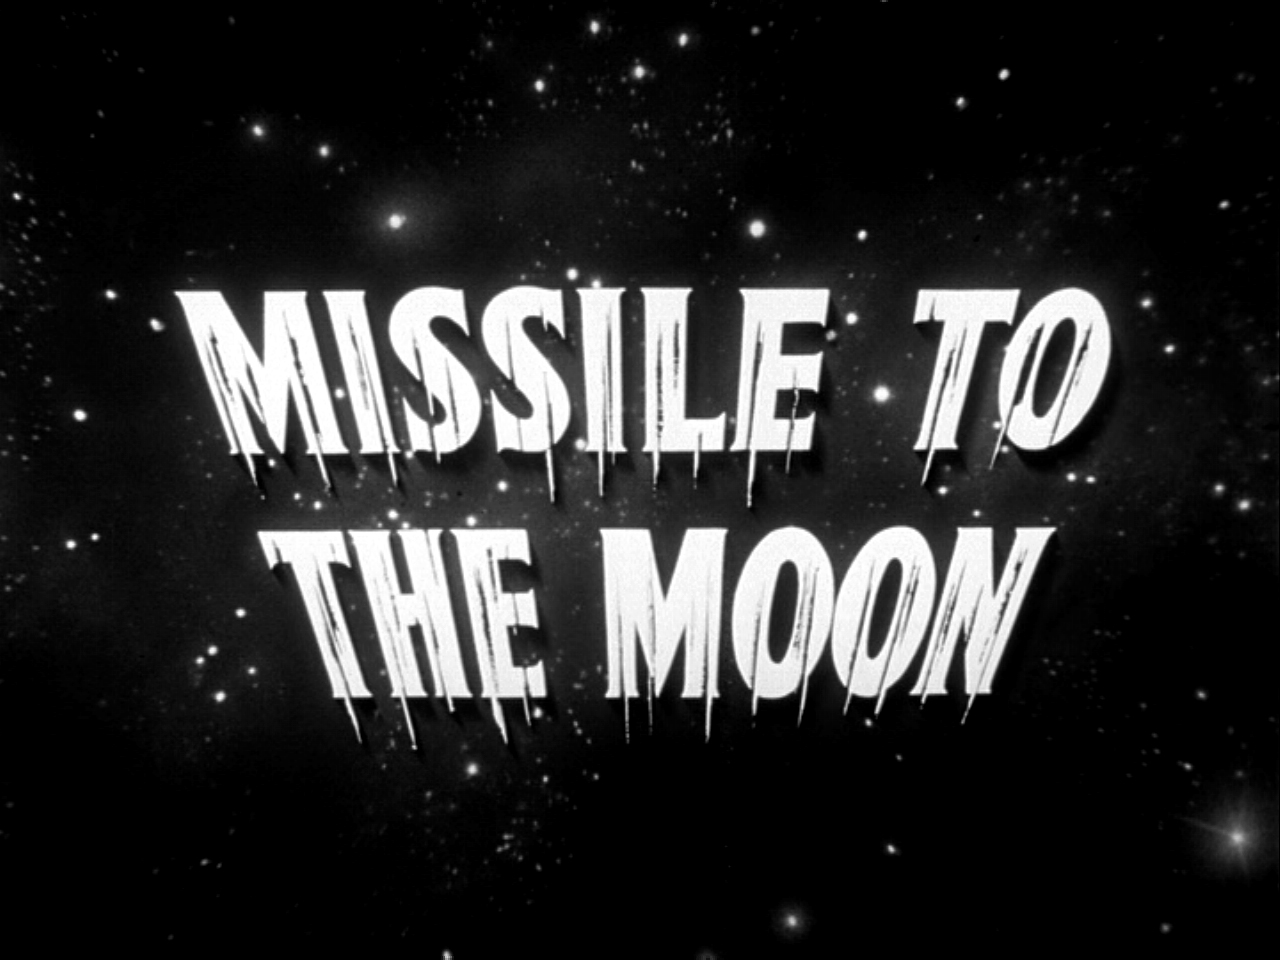 [Missile+to+the+moon+shill.jpg]